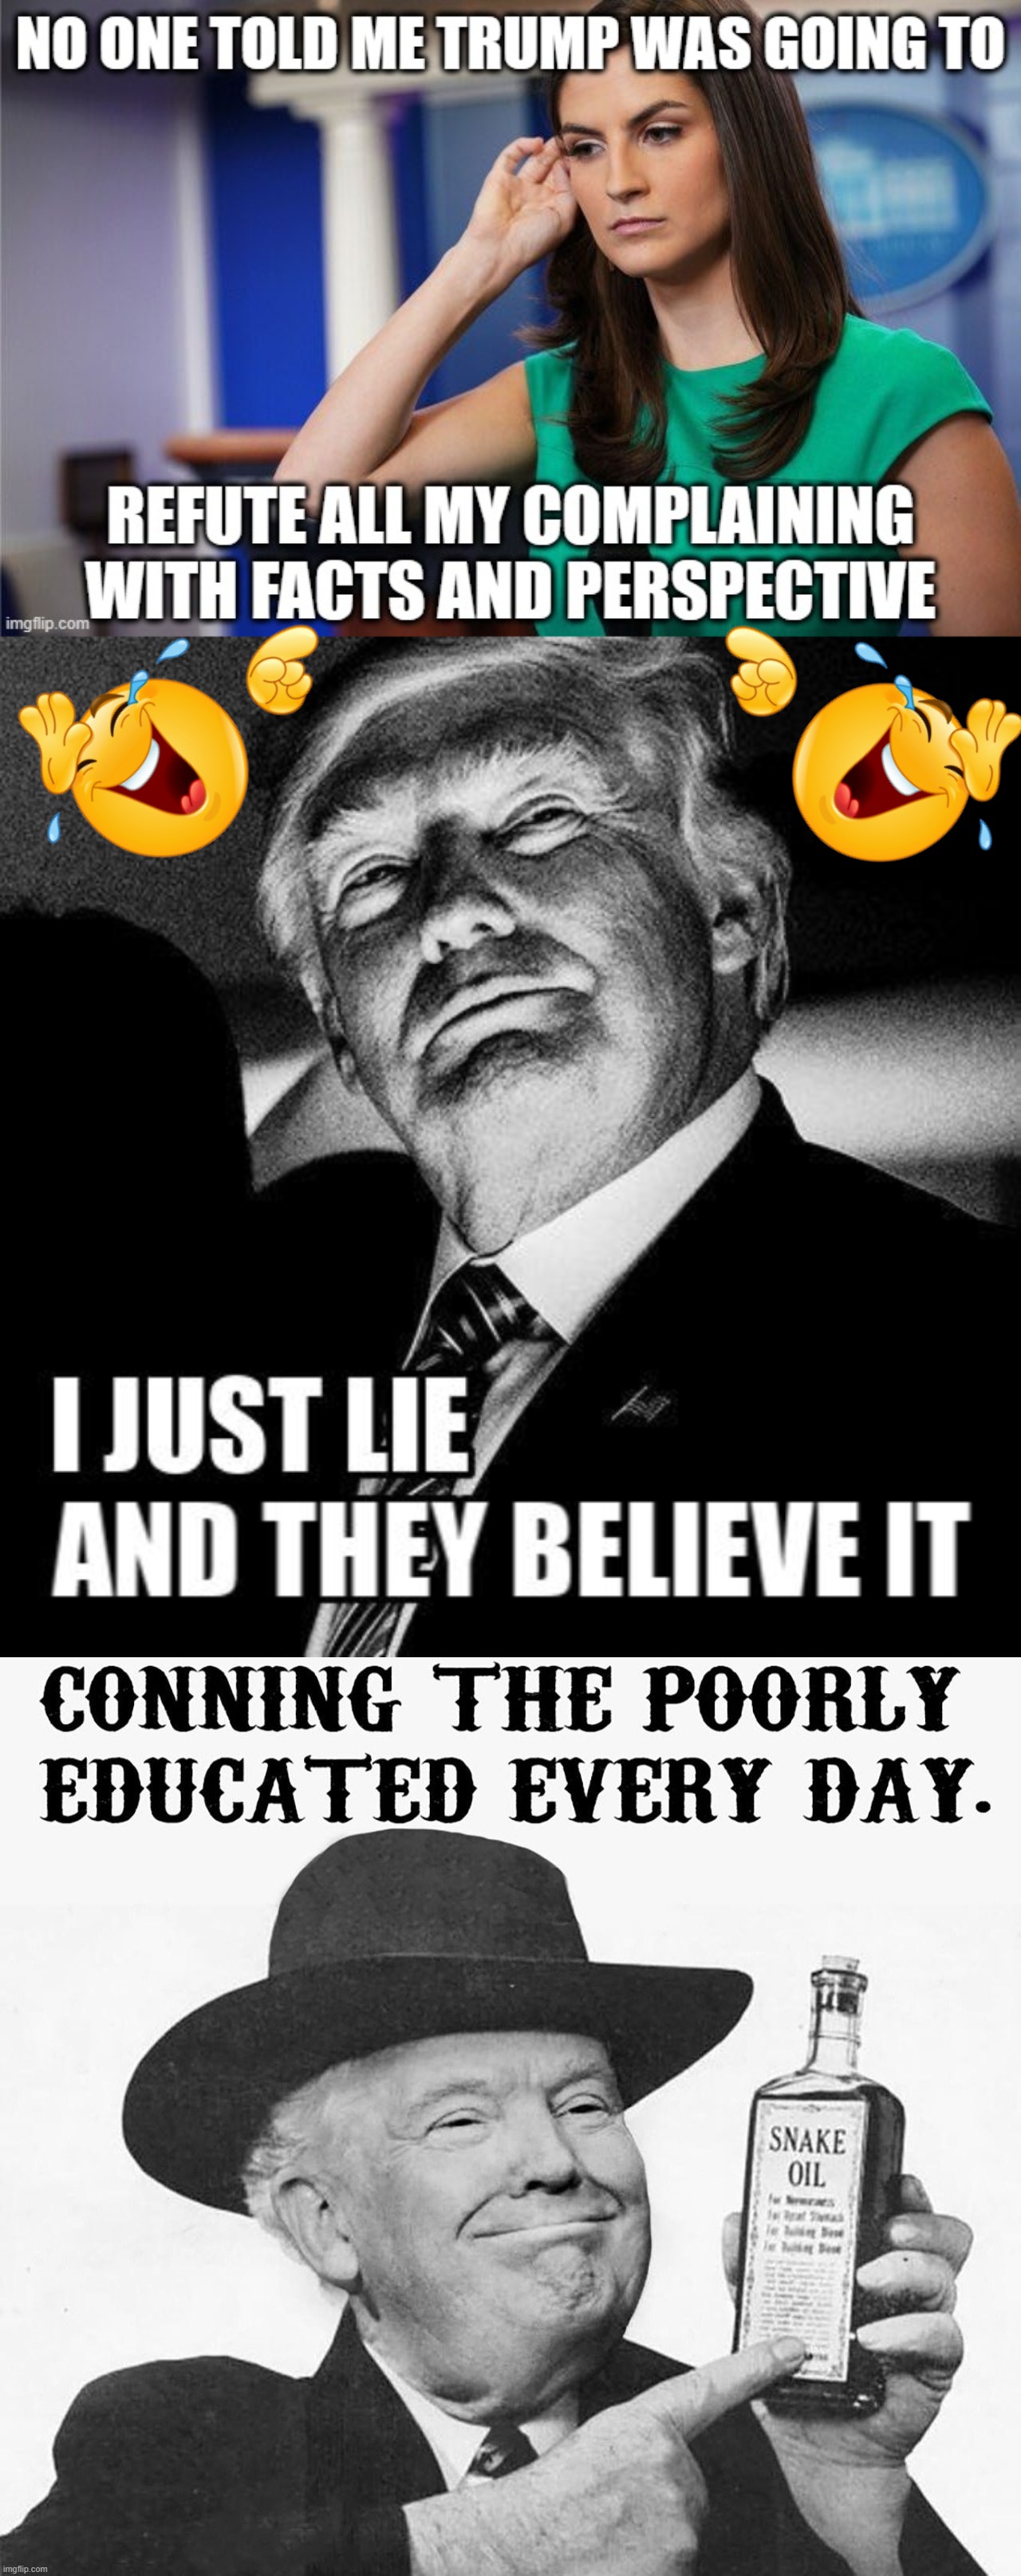 LOL, how sad these brainless twits beLIEve a conman. theres a suckertrumper born every minute...! | image tagged in brain,useless,sucker,trumpers,dumb,af | made w/ Imgflip meme maker